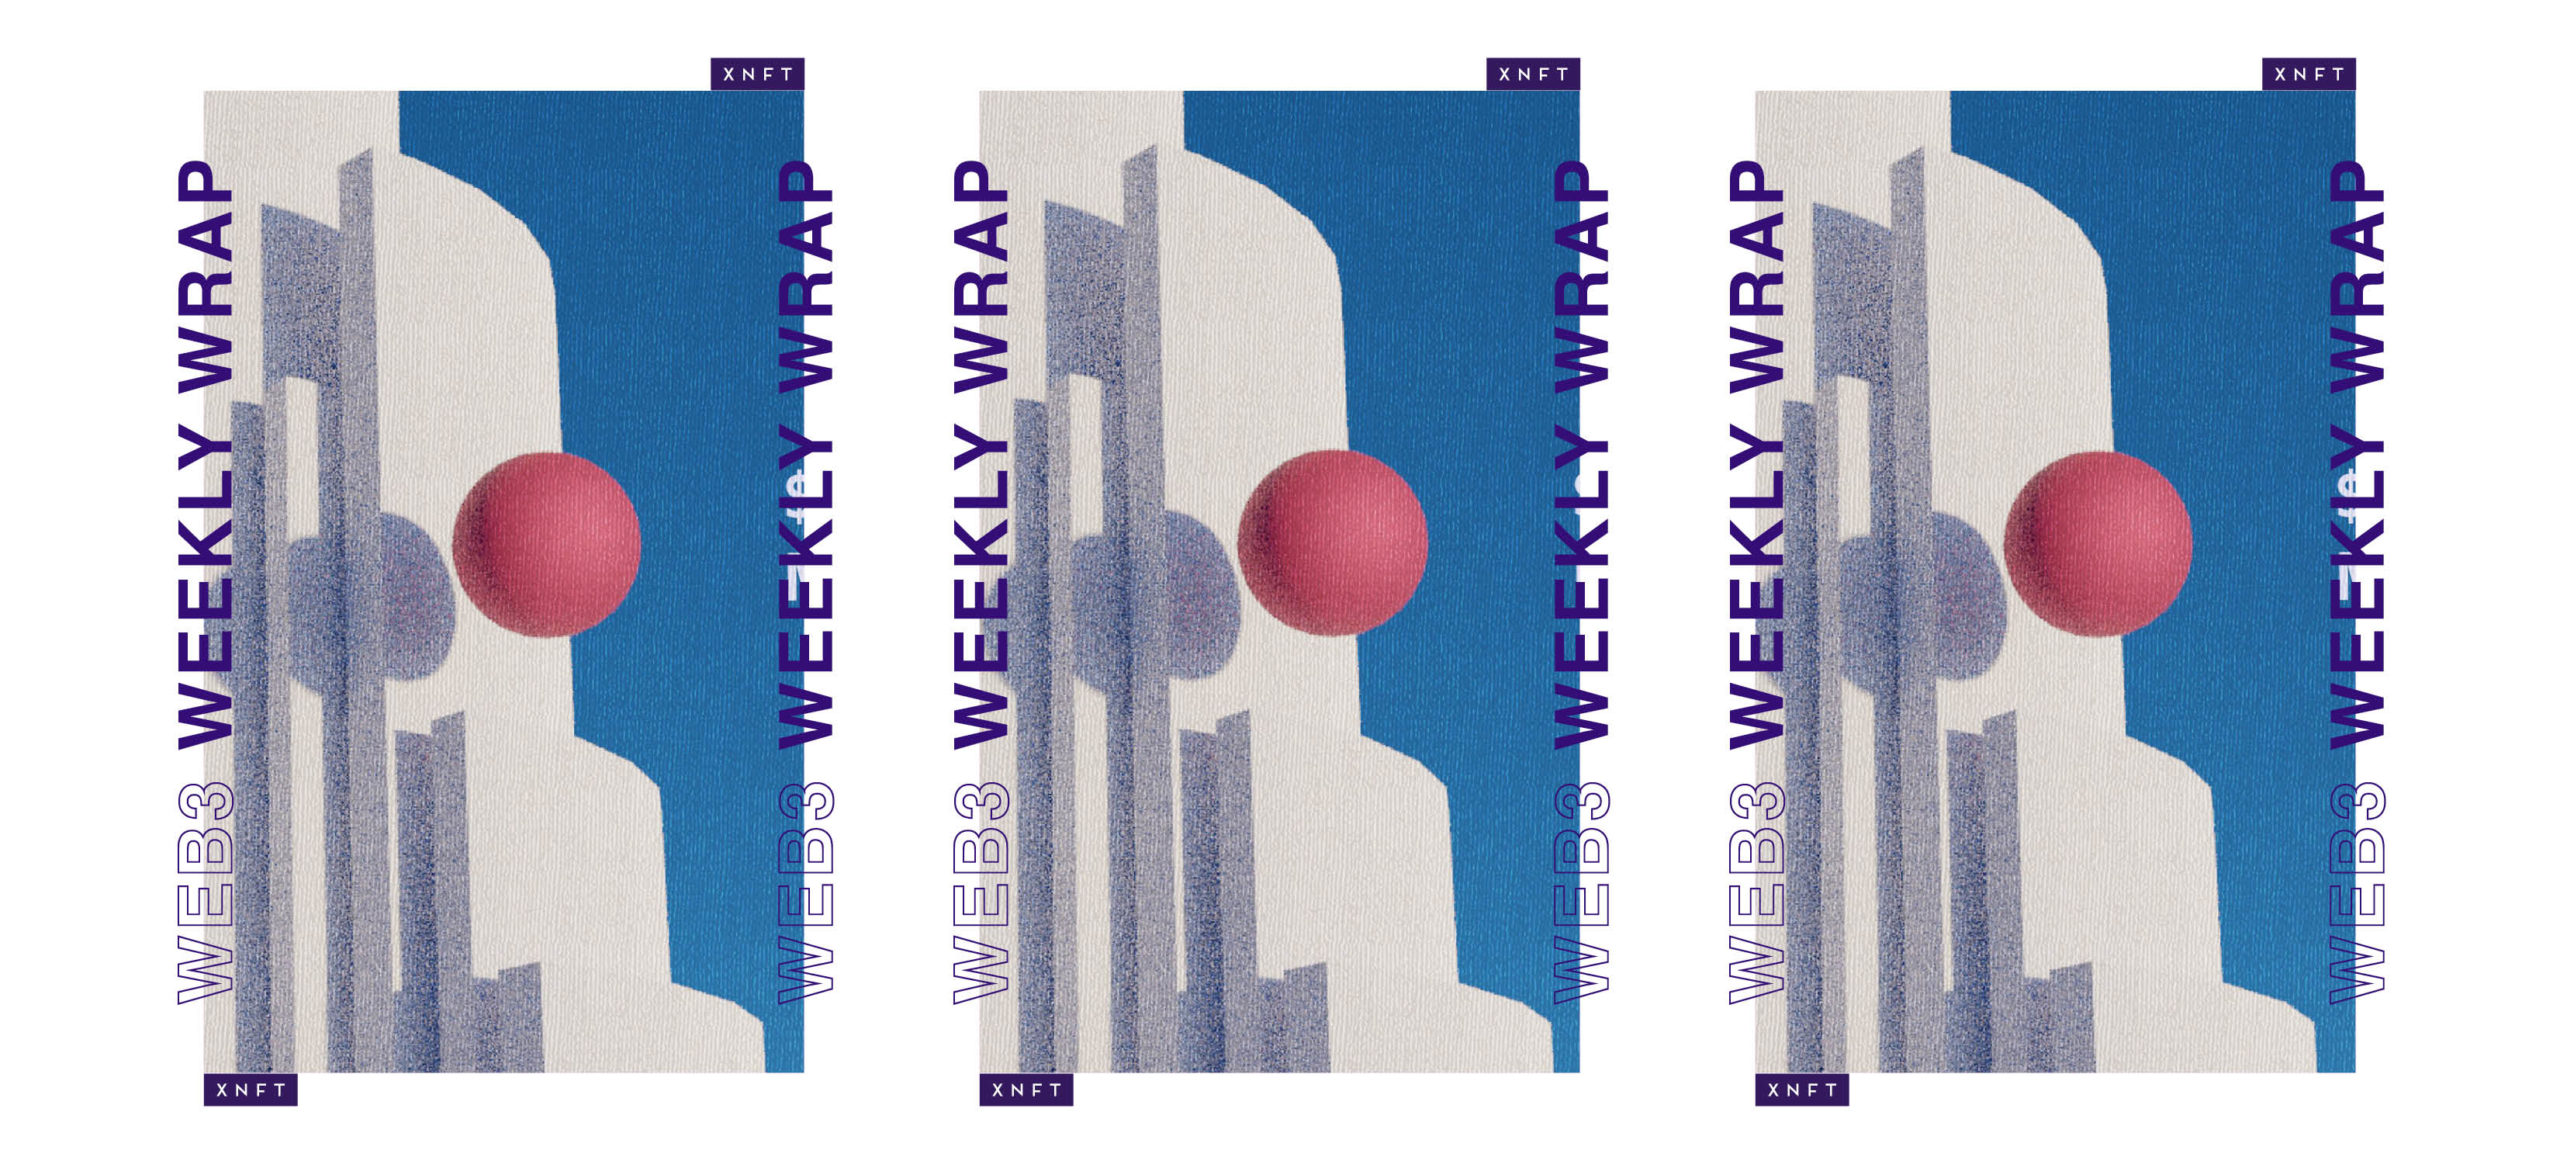 Web3 Weekly Wrap: Water & Music’s ‘Music and the Metaverse’ Playbook, Refraction’s Creative Grants Program, Vic Mensa and Keyon Christ, and MoreWeb3 Weekly Wrap: Water & Music’s ‘Music and the Metaverse’ Playbook, Refraction’s Creative Grants Program, Vic Mensa and Keyon Christ, and More